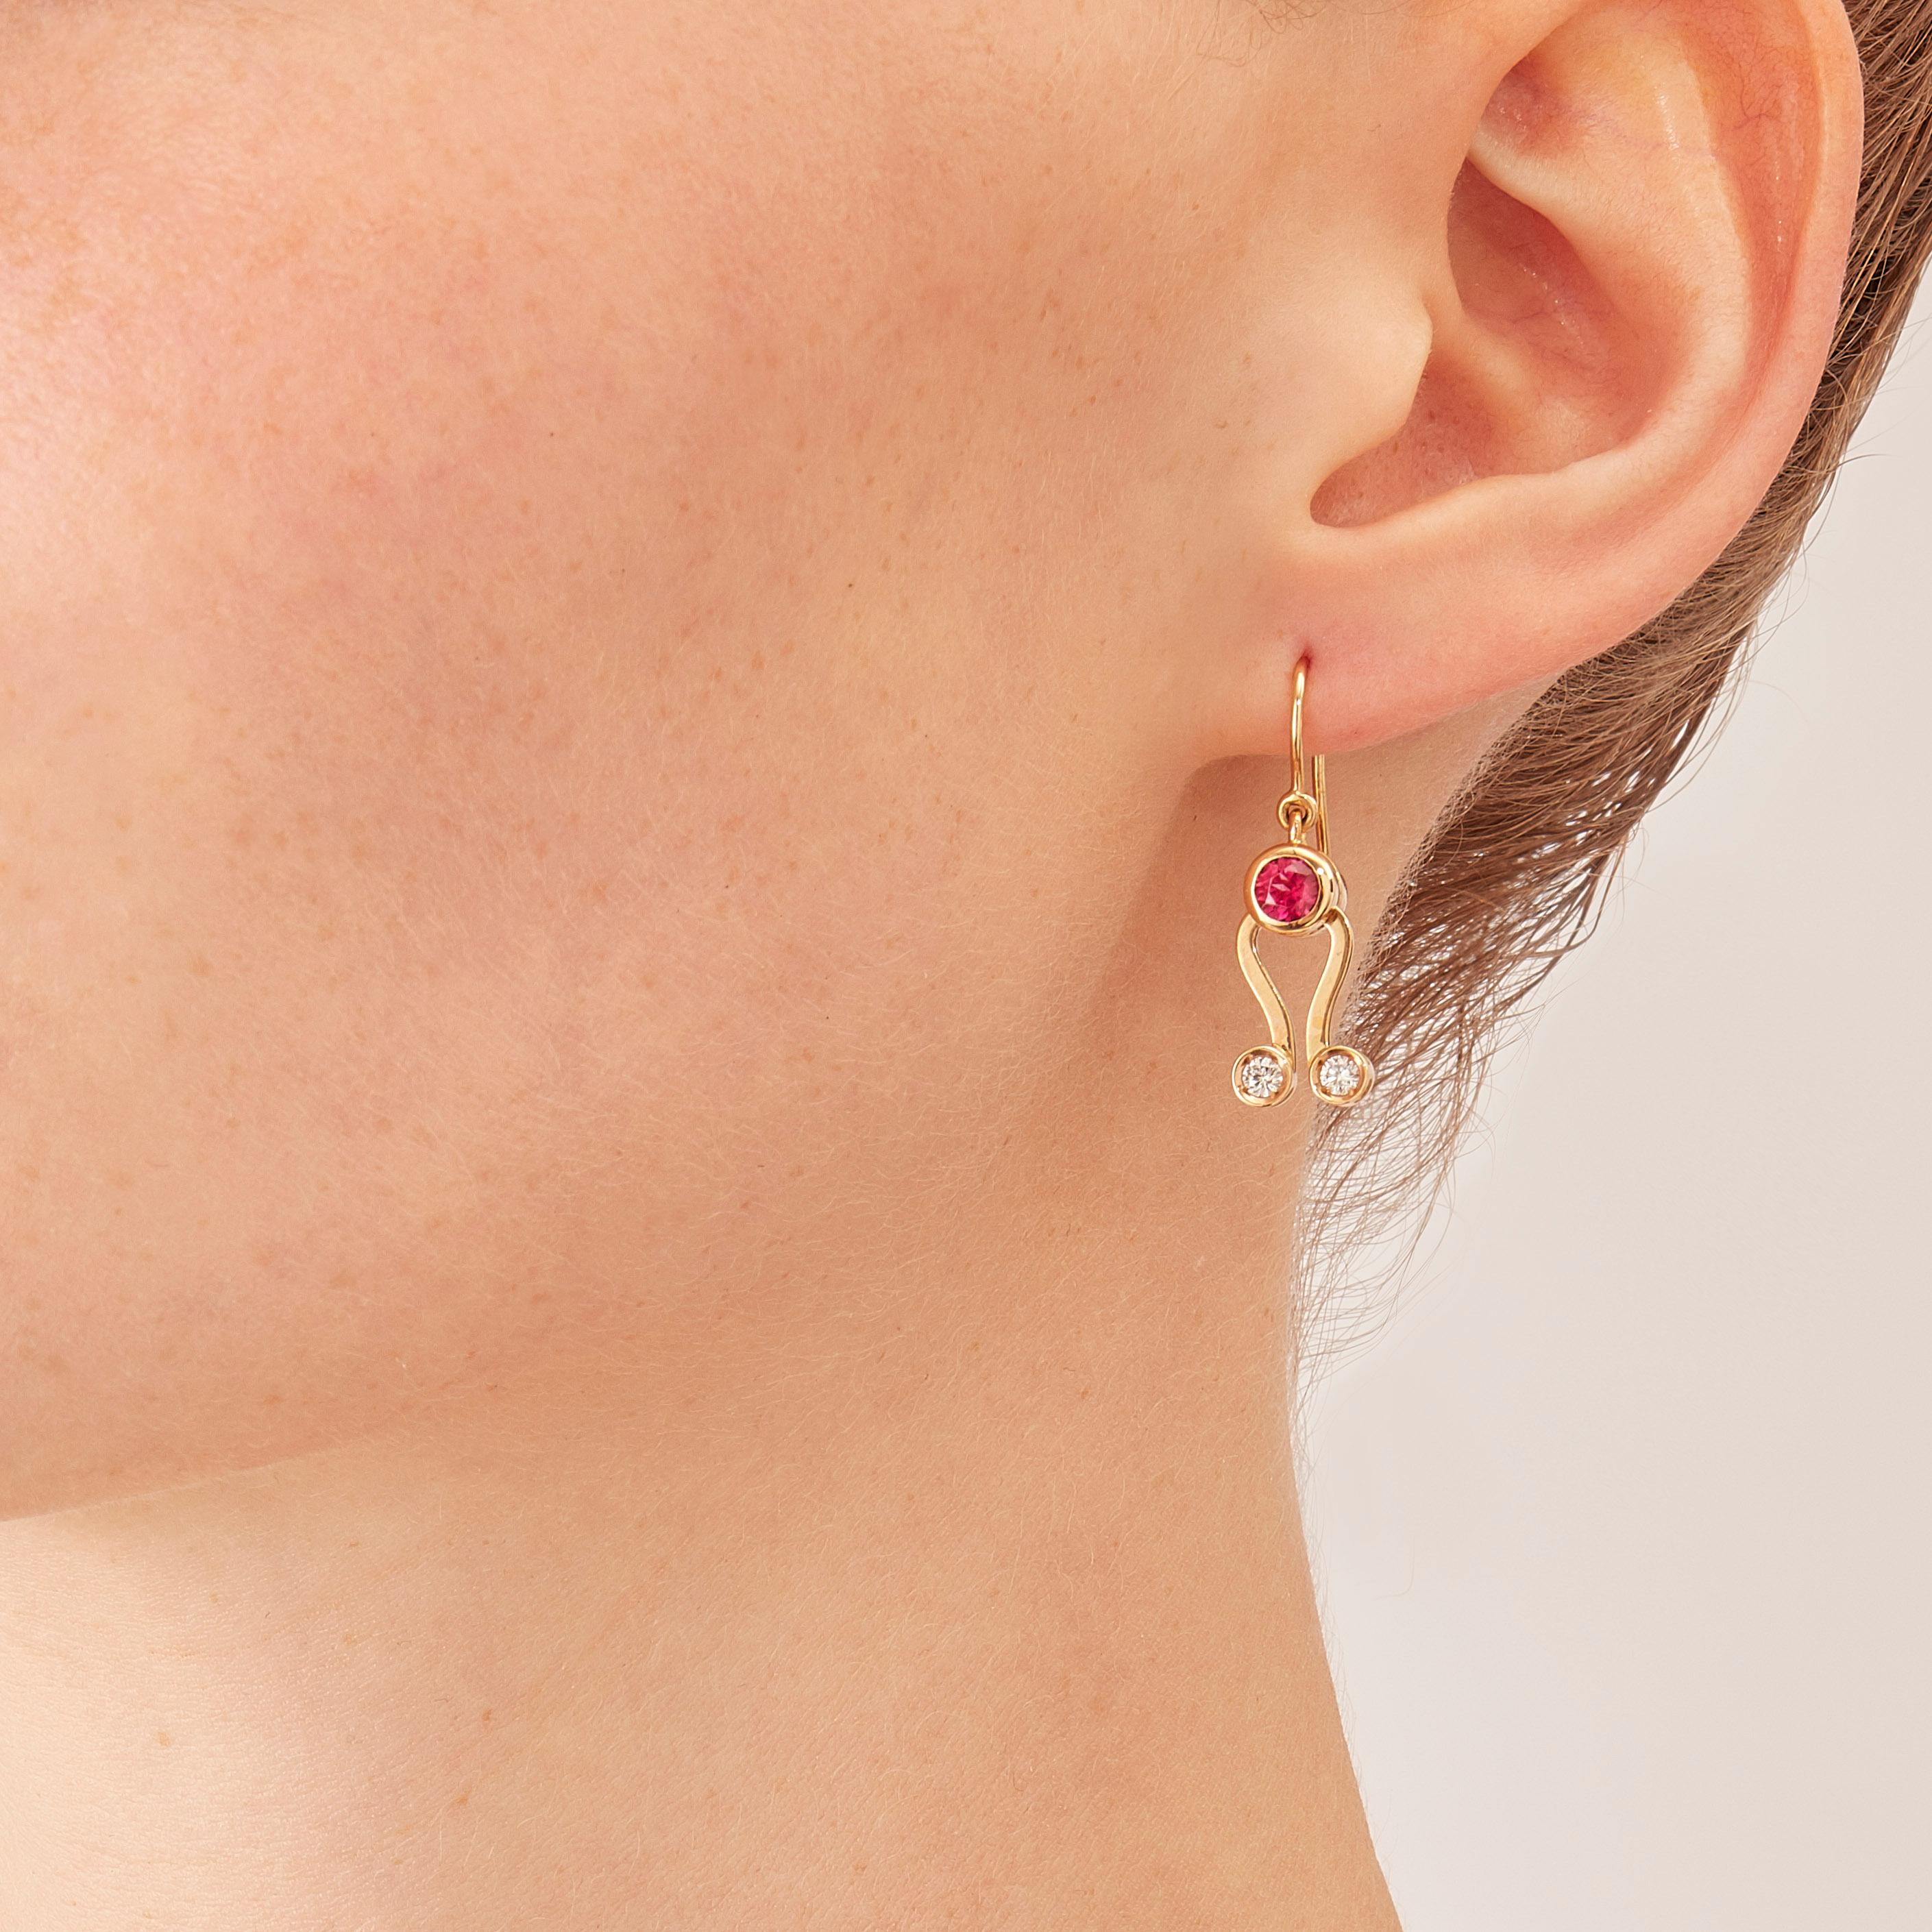 Microcosmos drop earrings are in 18 karat in rosé gold, a warm, sophisticated color close to yellow gold. They are part of the Microcosmos Series and are devised as a game, a construction or a sophisticated aerial mobile. Shapes attached to gold